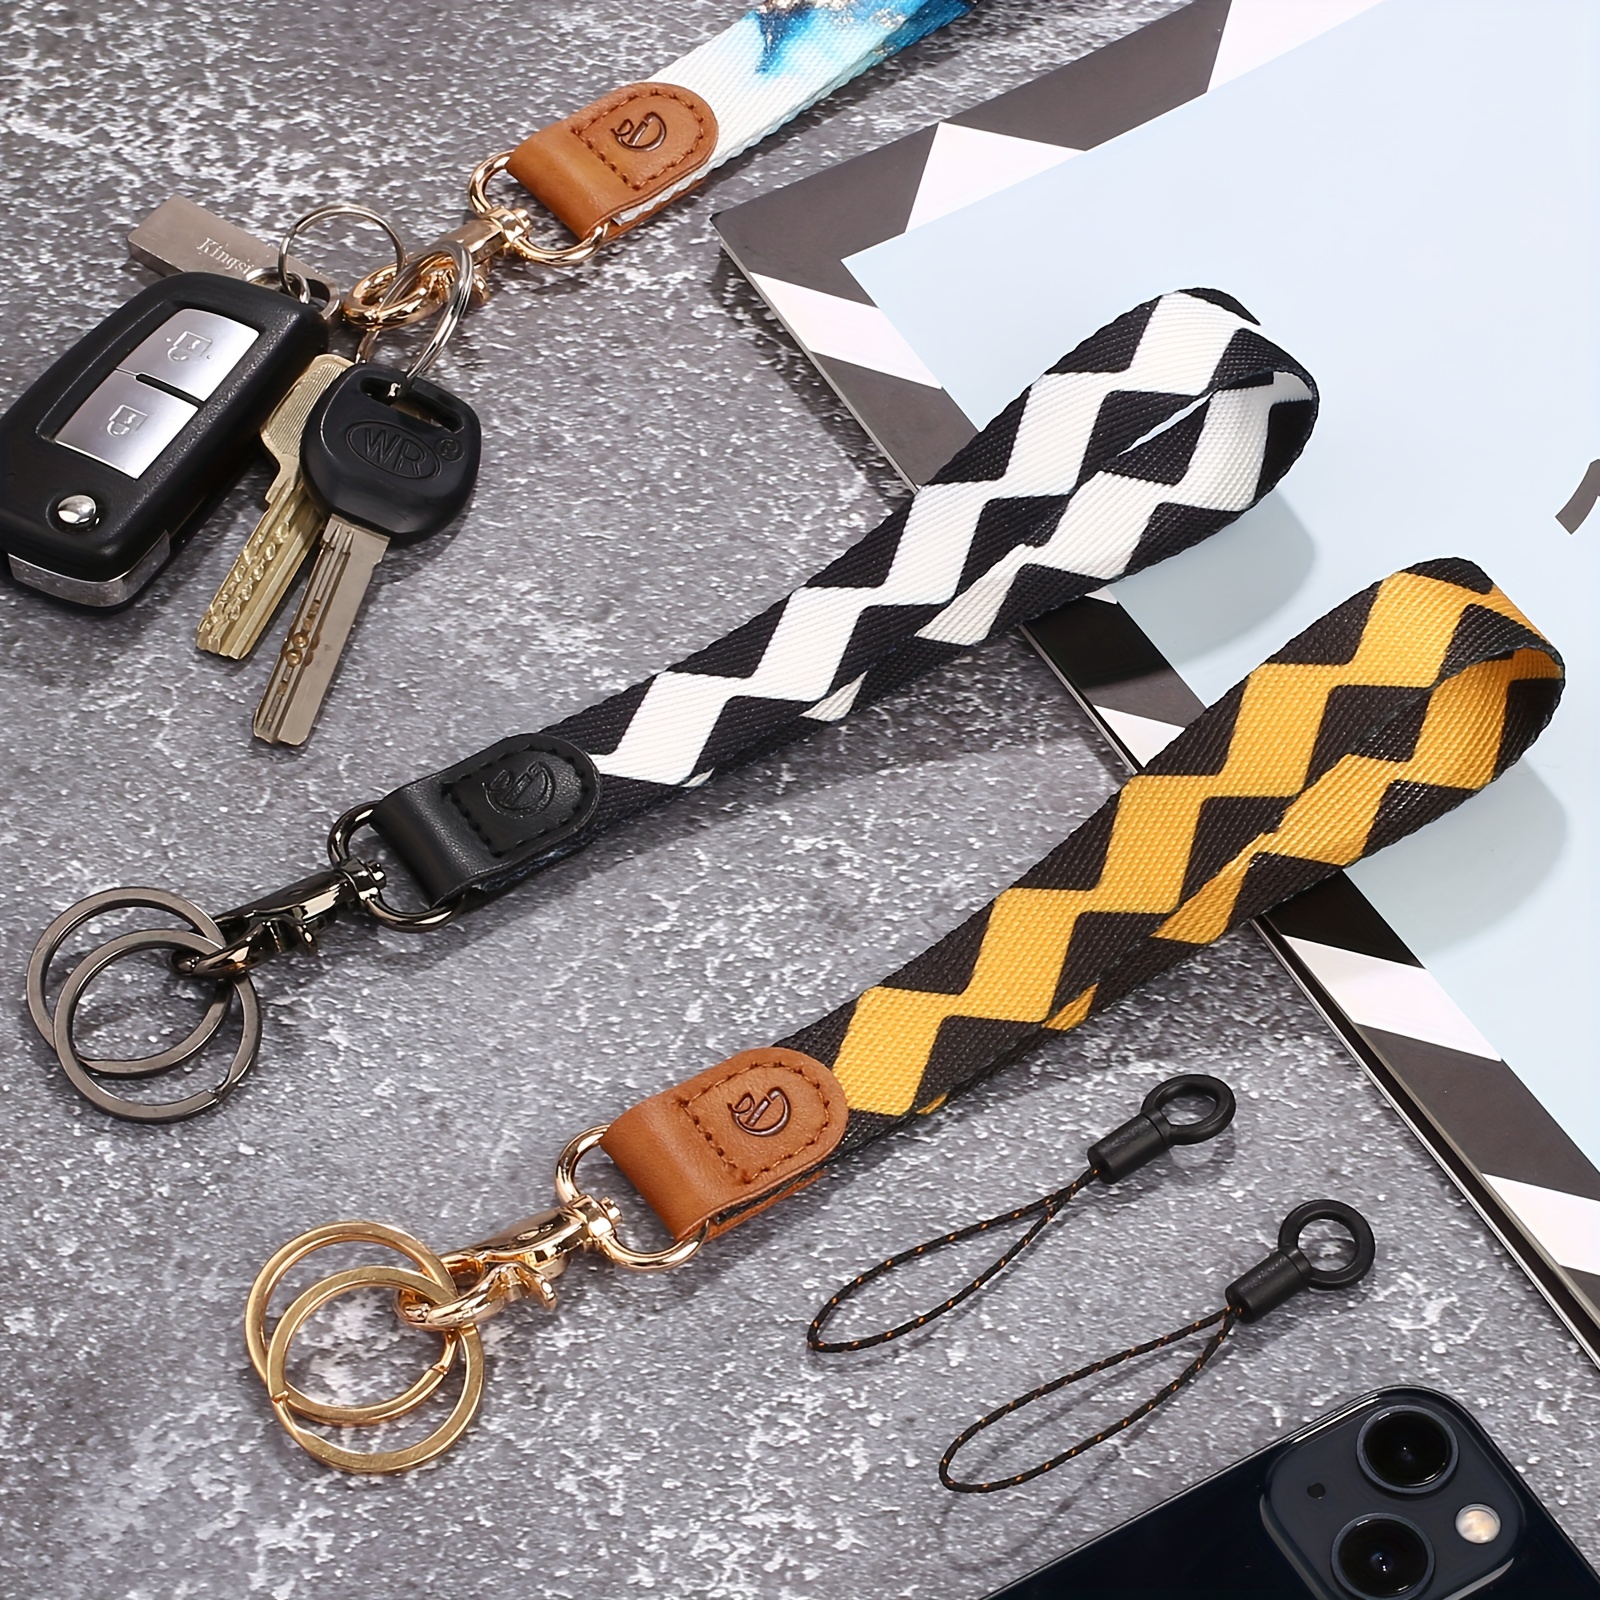 Wrist Lanyard for Keys with Key Chain for Wallet, Cellphone, Car Keys - 5